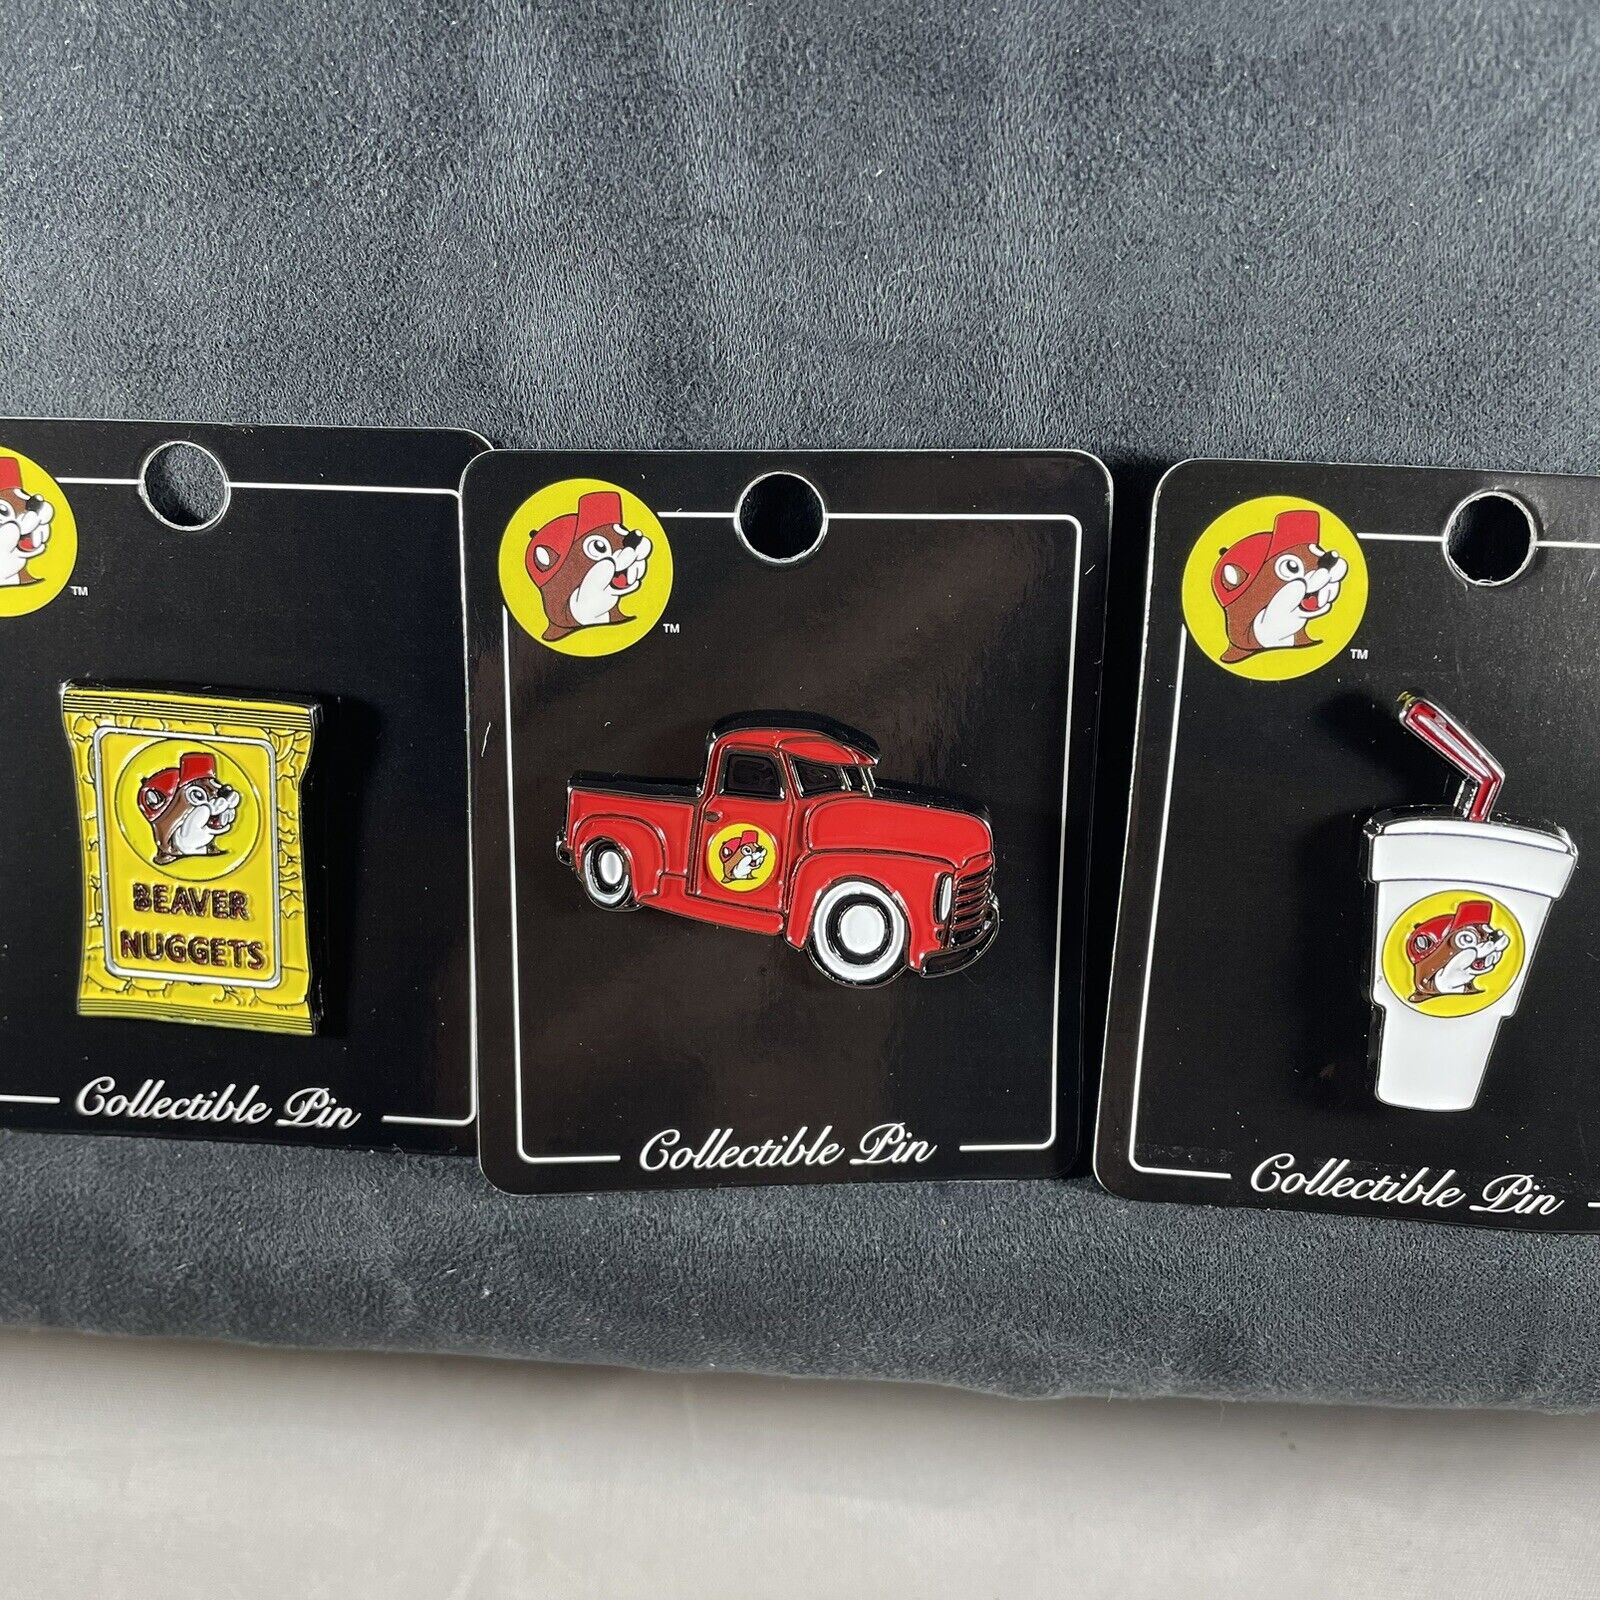 Bucees Set Of 3 Collectible Lapel Pin Beaver Nuggets Cup Red Truck New Texas